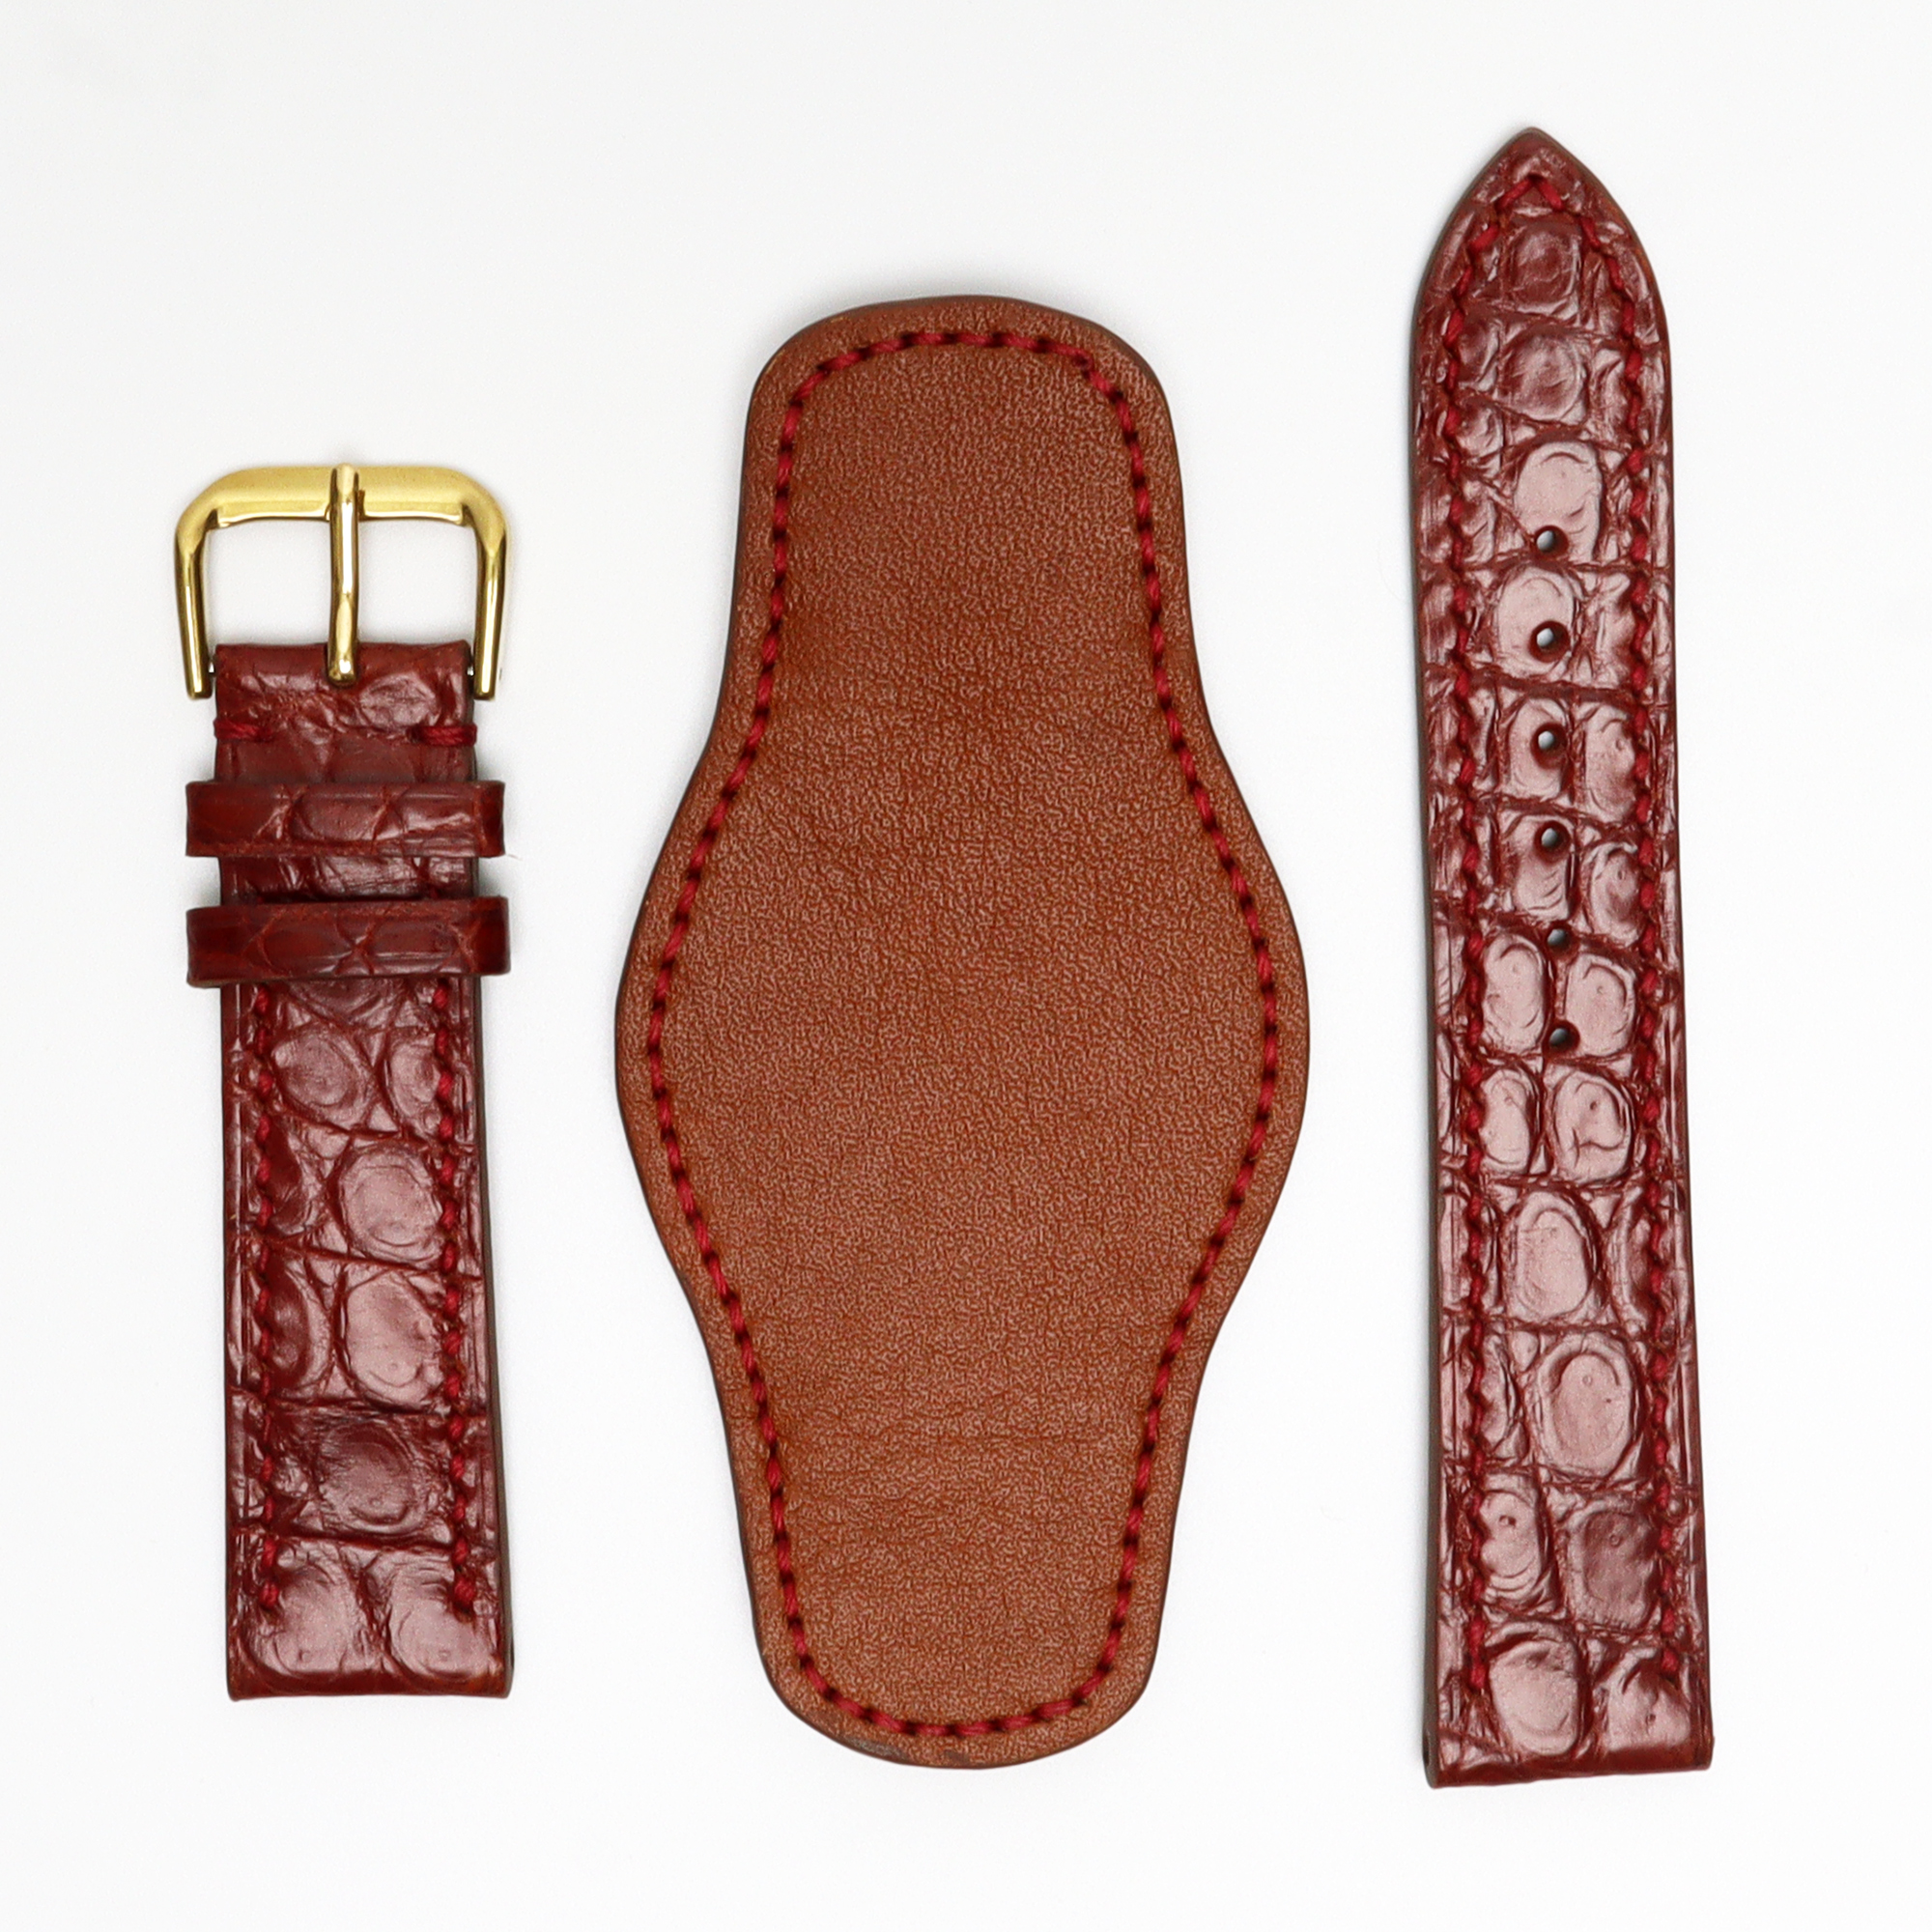 Genuine Alligator Leather Watch Straps Panerai, Leather Watch Bands Quick Release Pins, Handmade Leather Watch Strap #4